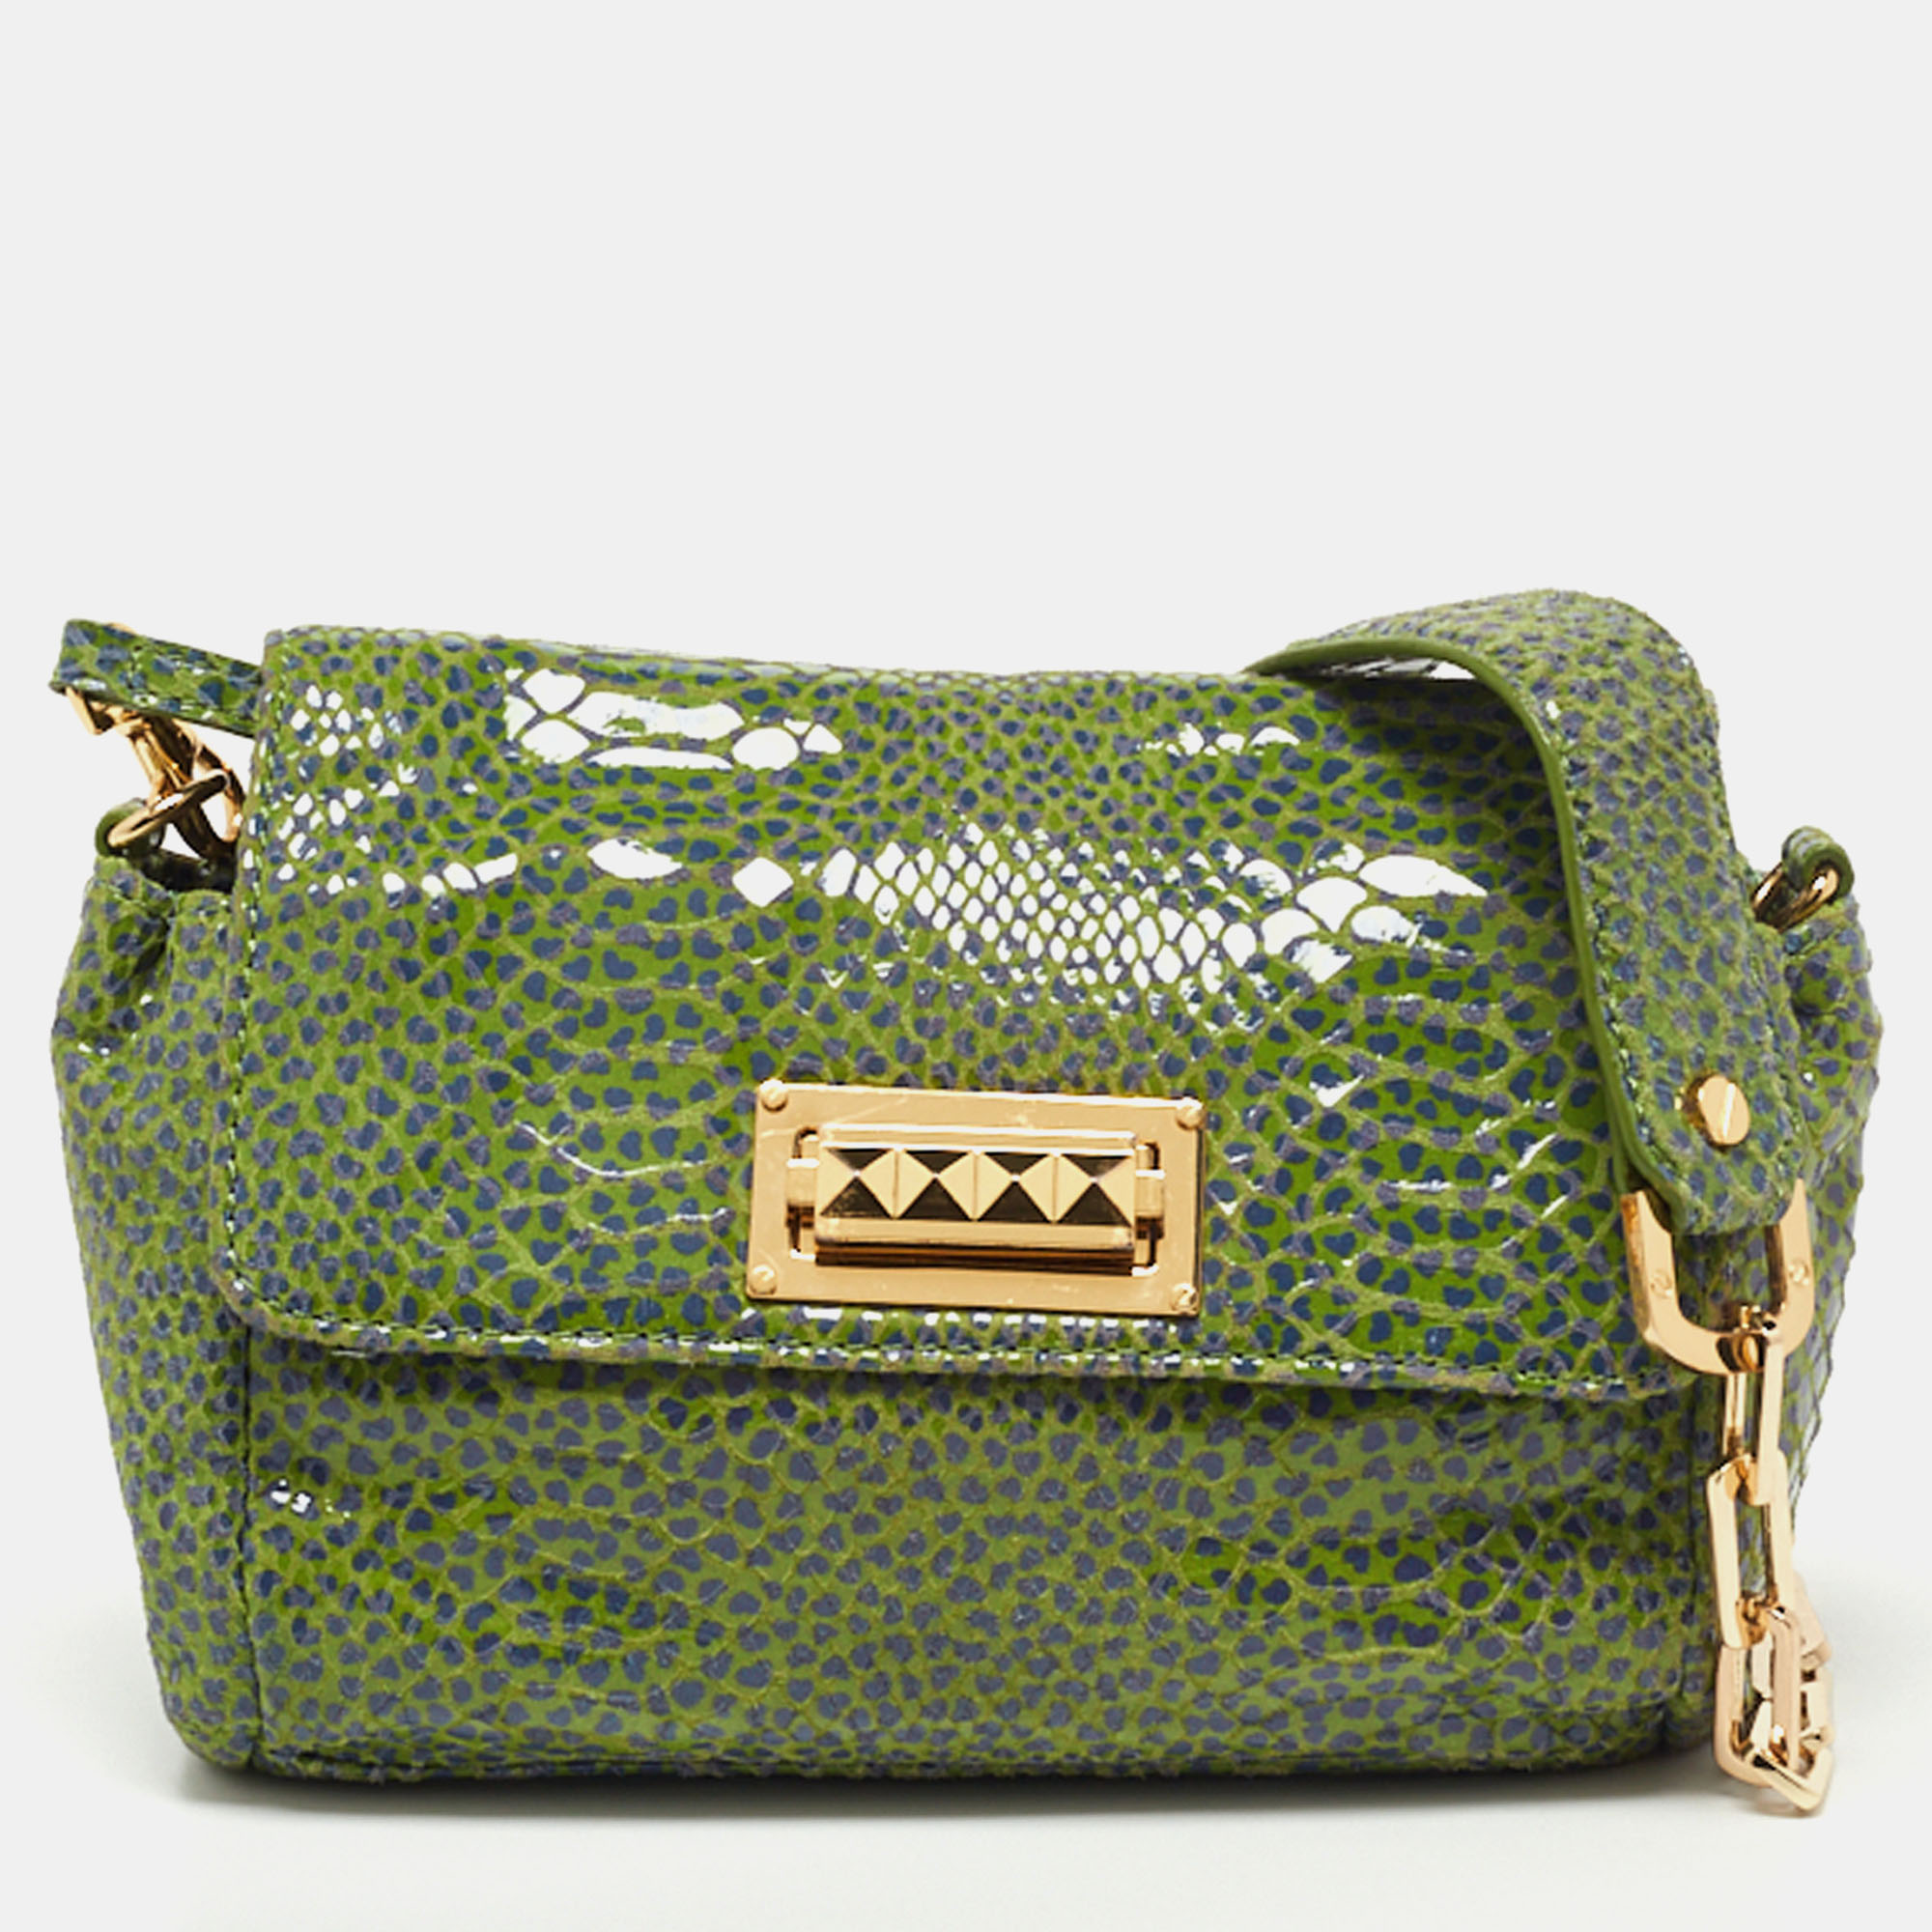 Pre-owned Tory Burch Green Python Print Laminate Leather Shoulder Bag